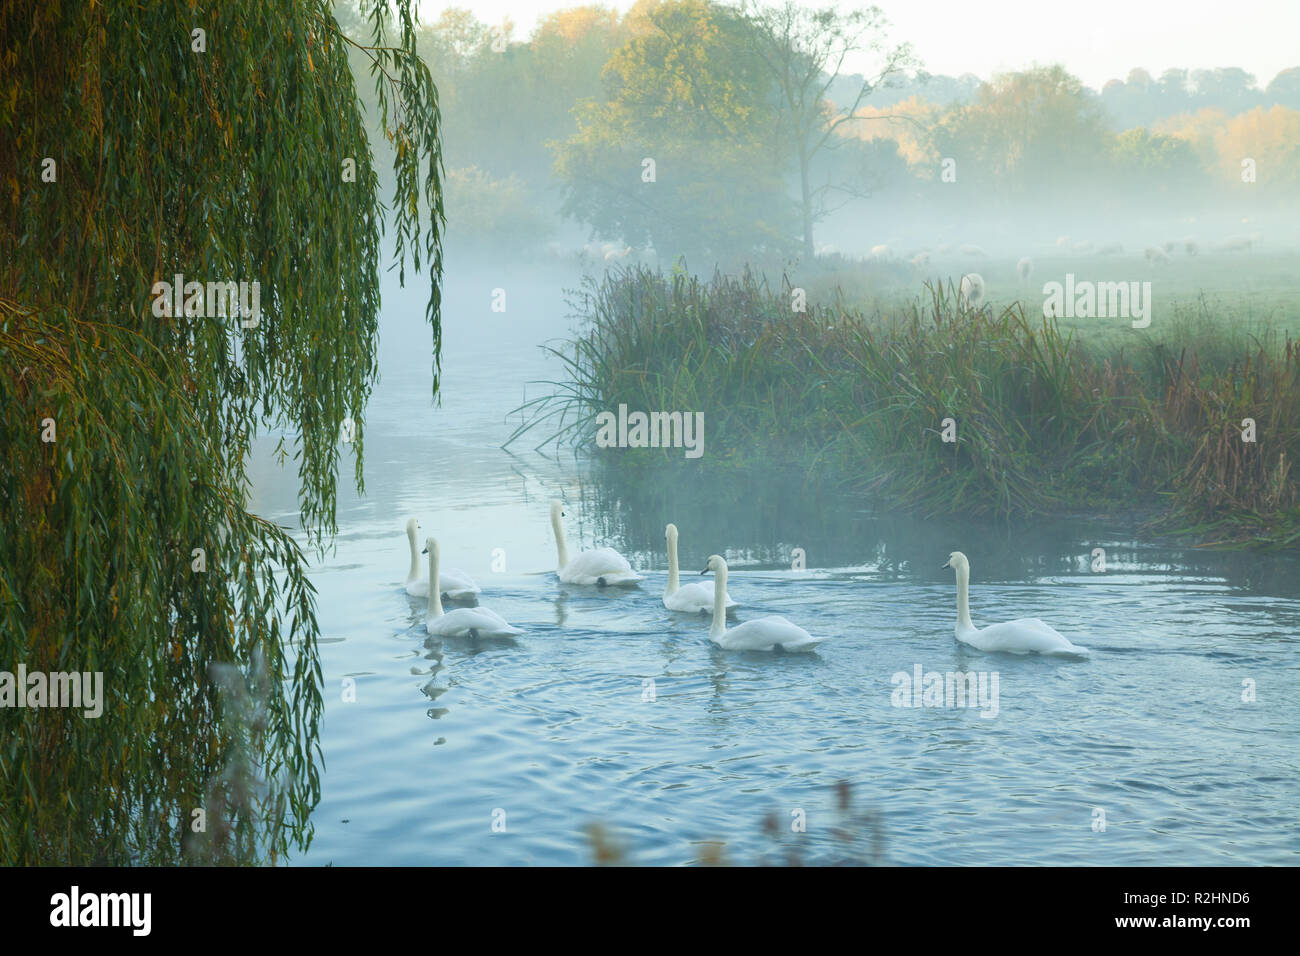 Swans swimming on a misty River Avon in Salisbury England. Stock Photo